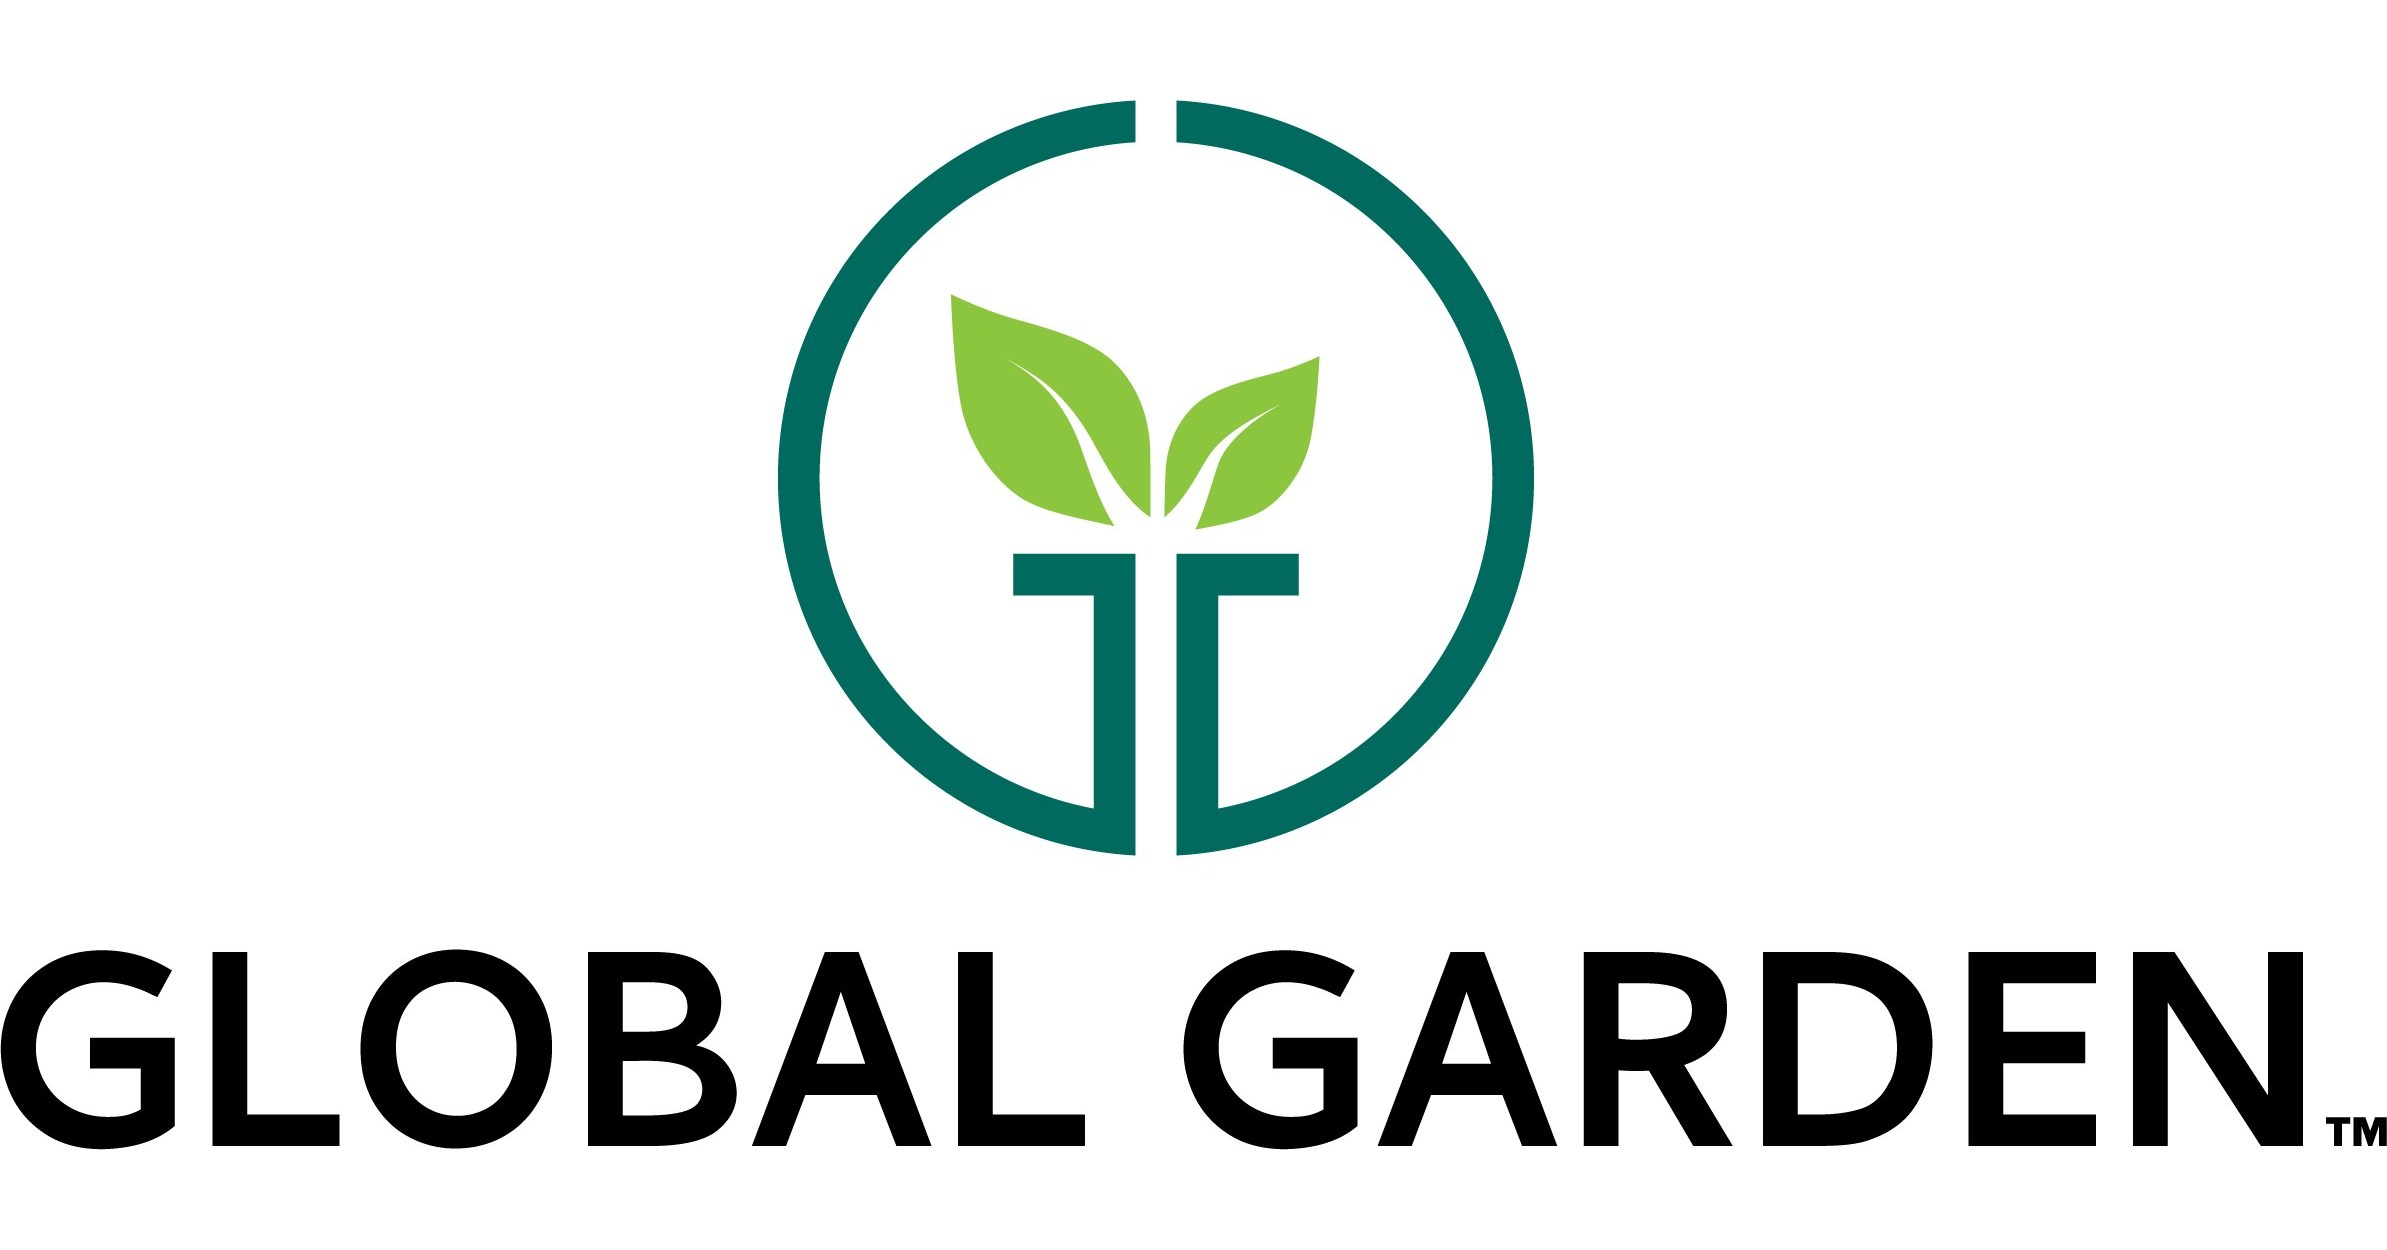 Global Garden Partners With Nurserysource For The Distribution Of The Rediroot Product Line Of Fabric Aeration Pots Plastic Aeration Pots And Aeration Propagation Systems